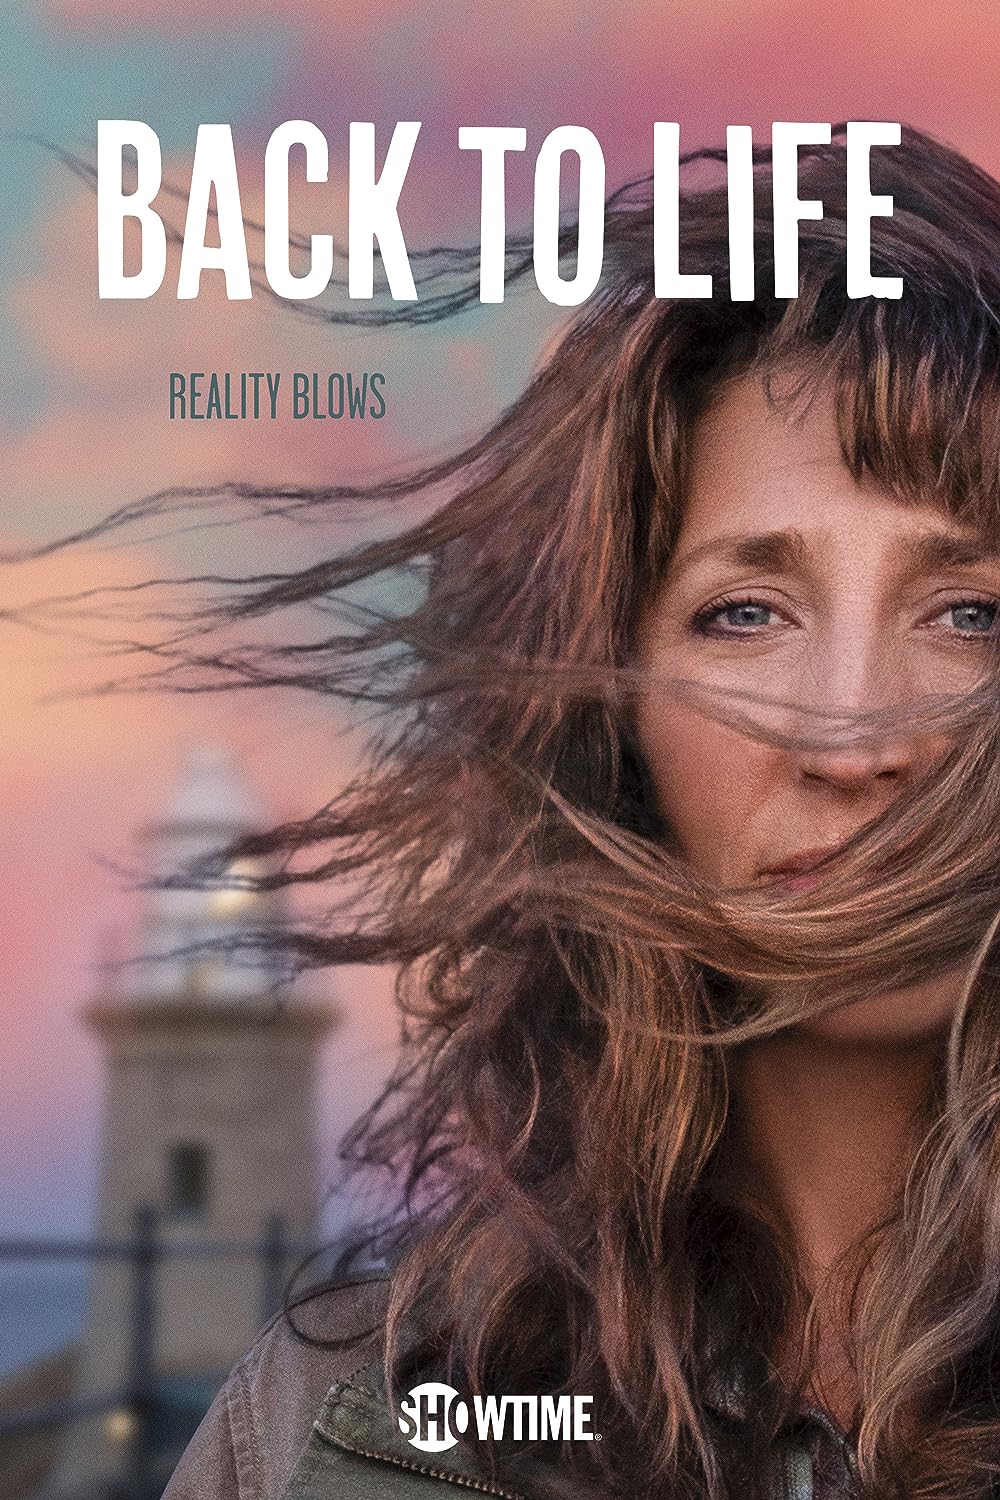 Back to Life poster